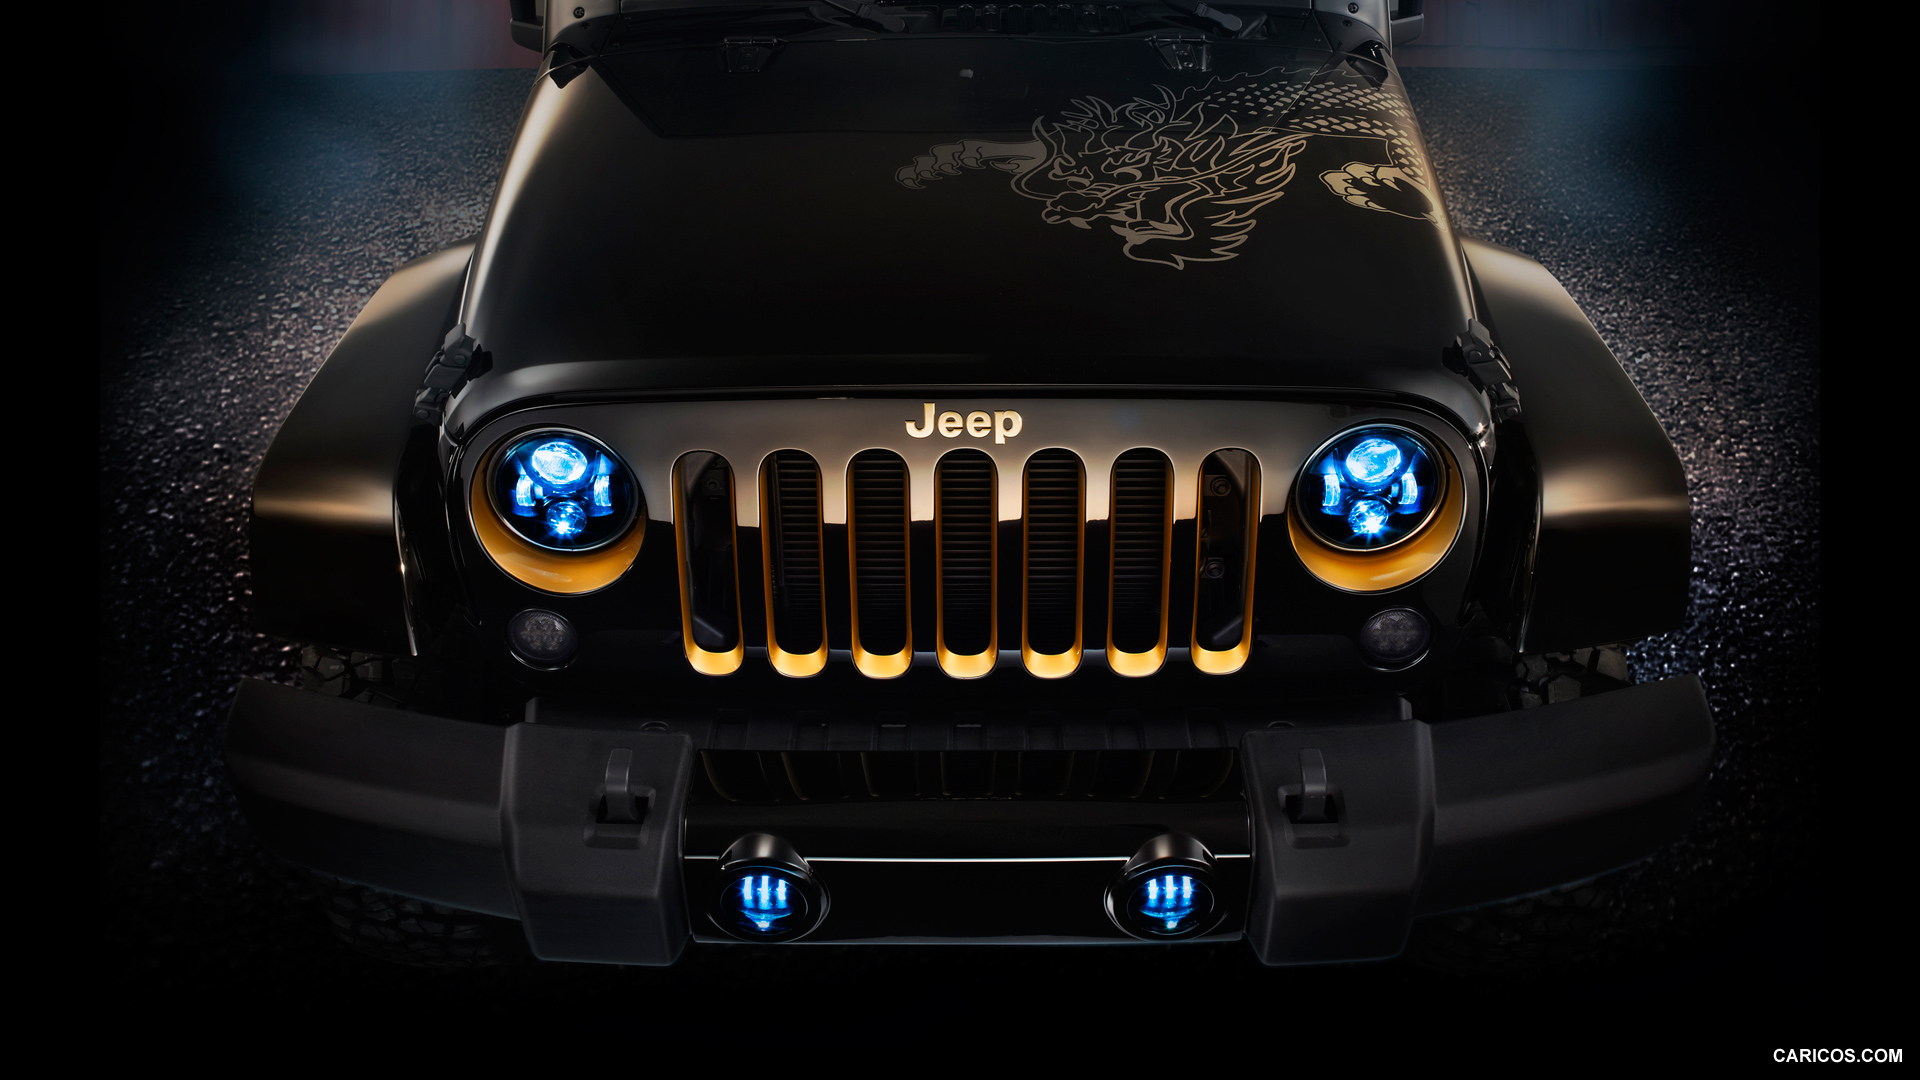 Free download download wallpapers jeep wrangler willys wheeler hd x for your desktop mobile tablet explore jeep logo wallpaper jeep wallpapers hd jeep photos wallpaper free jeep wallpapers